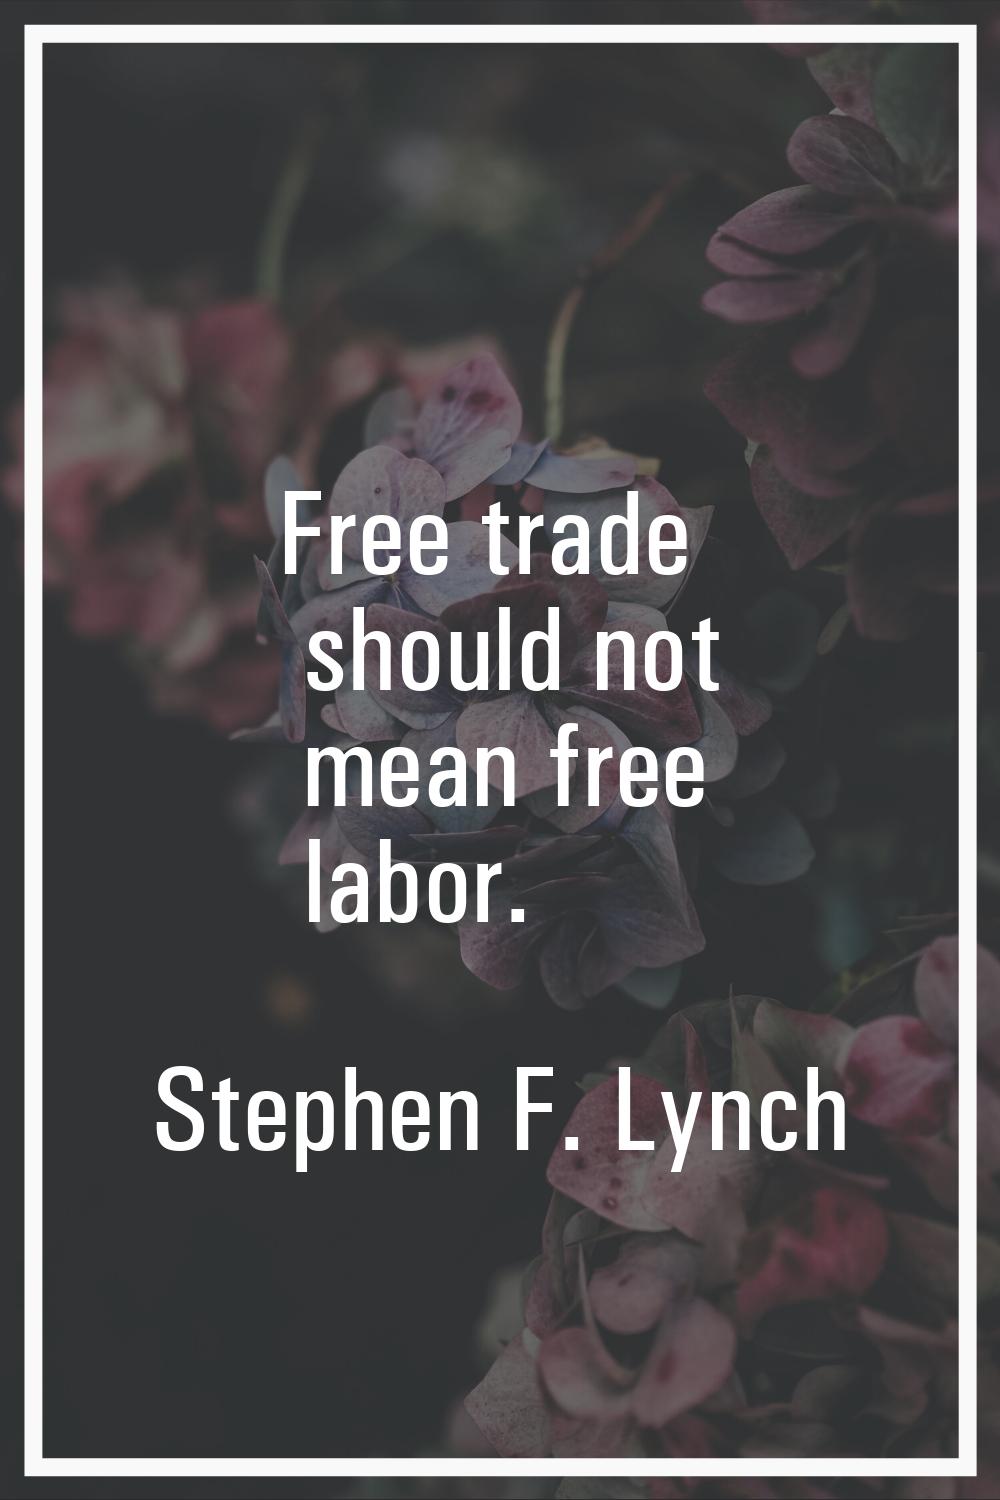 Free trade should not mean free labor.